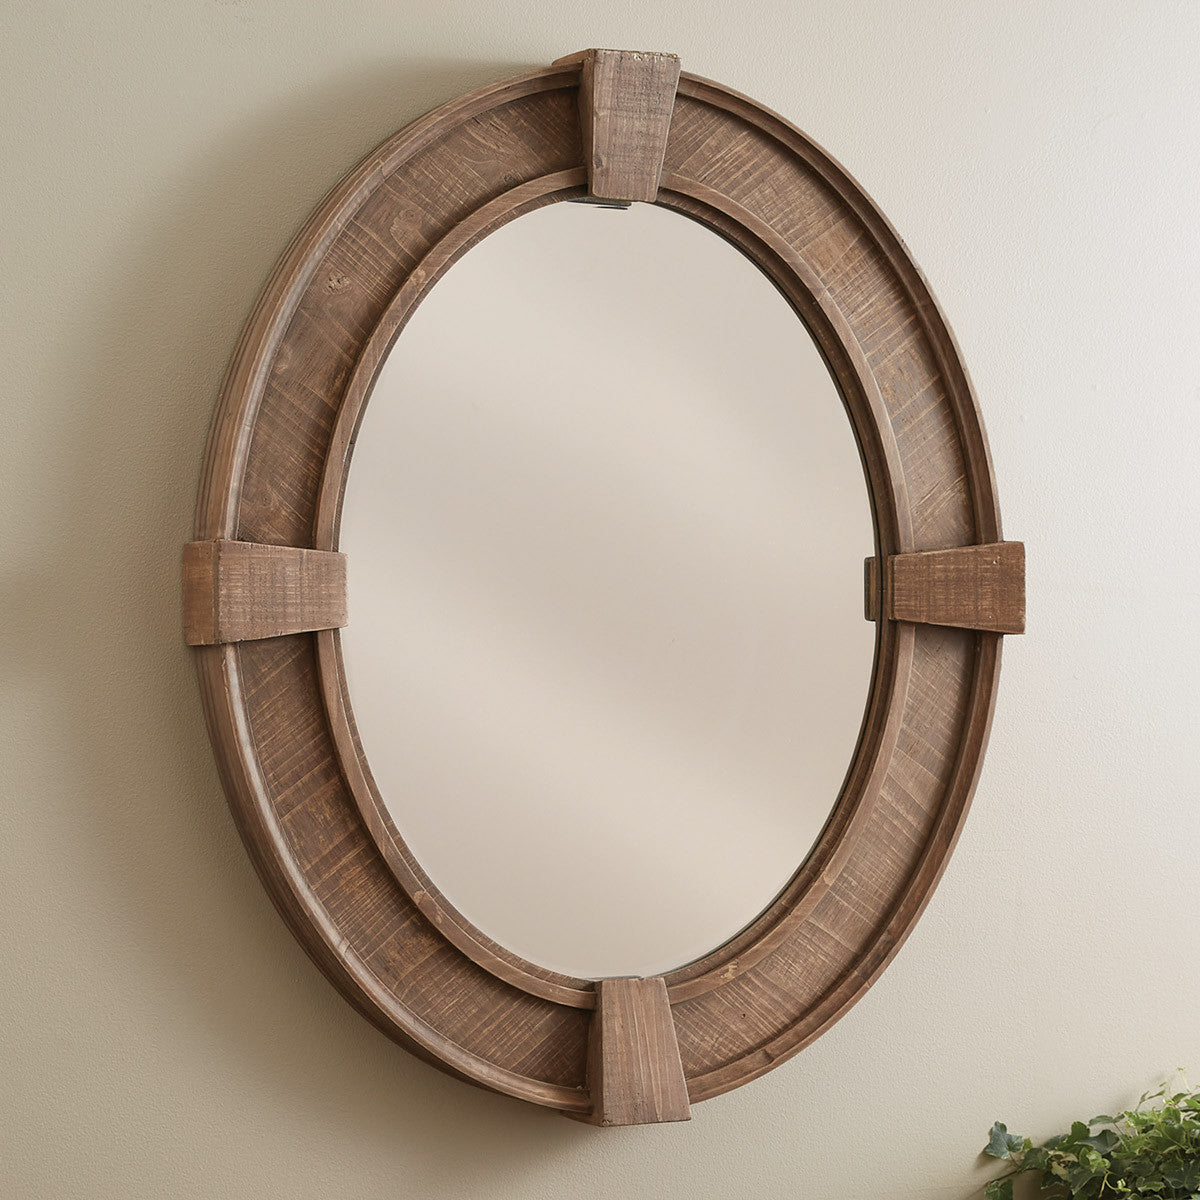 Oval Distressed Wood Mirror!!- Pick Up Only